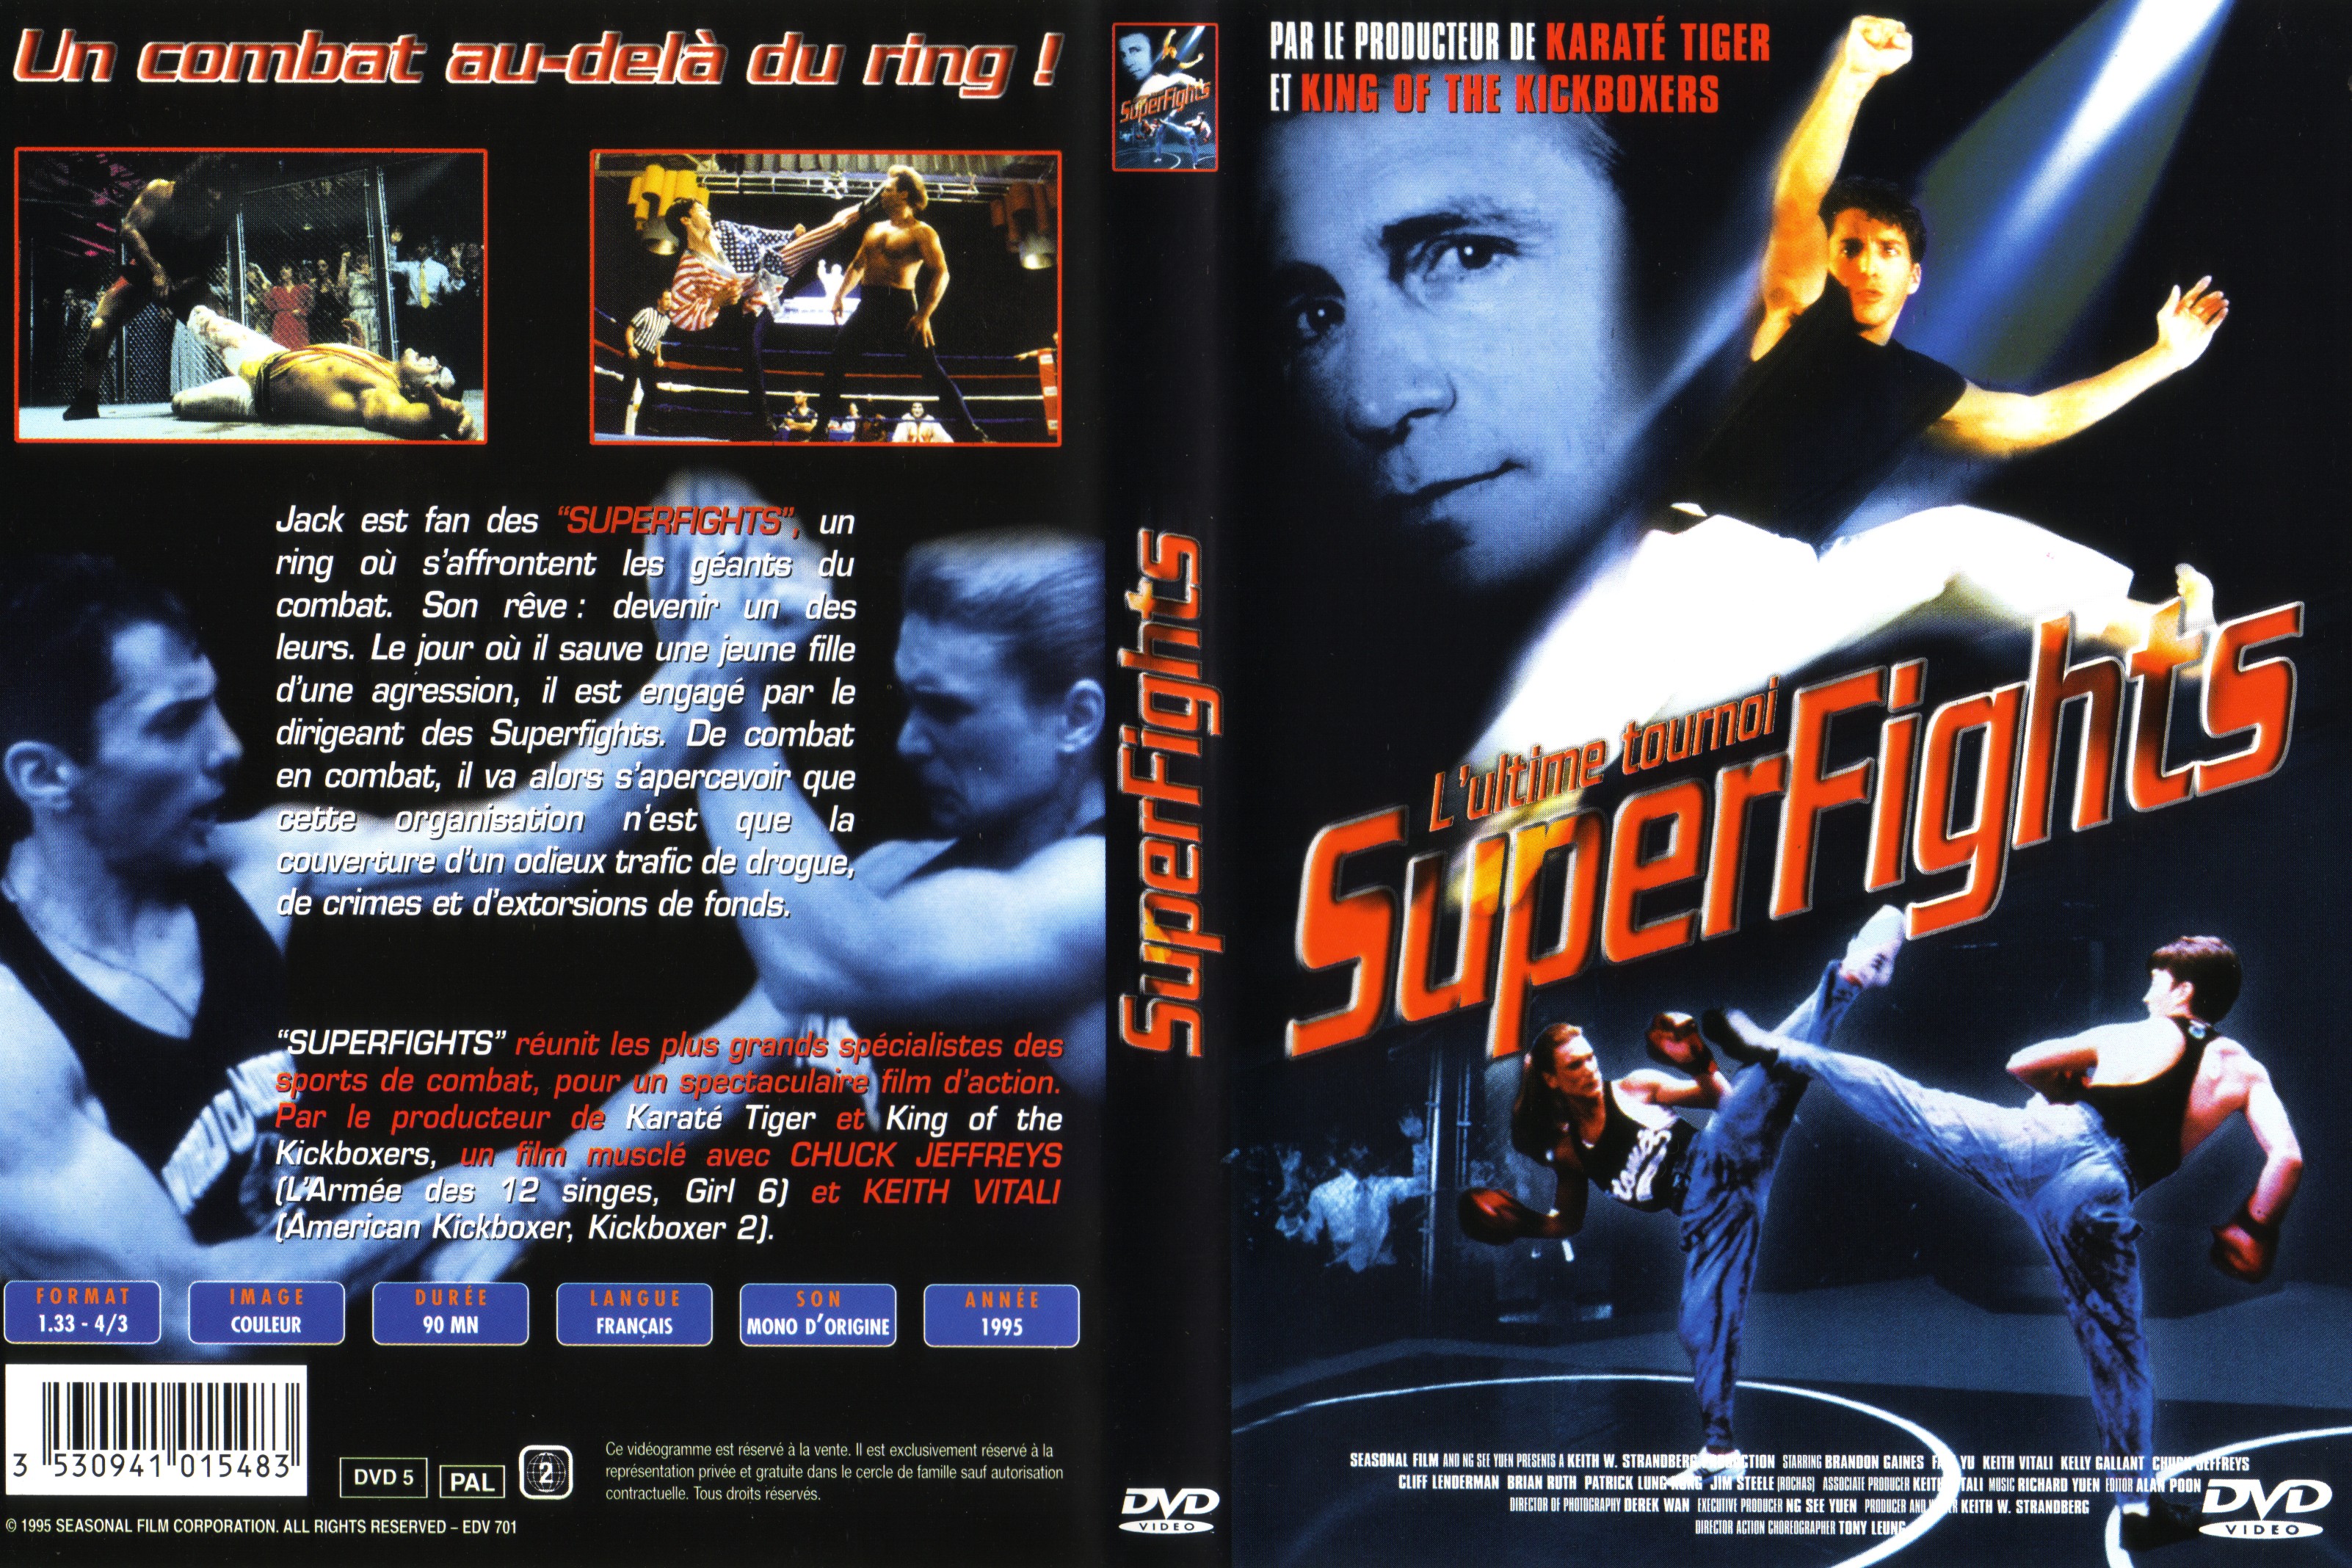 Jaquette DVD Superfights